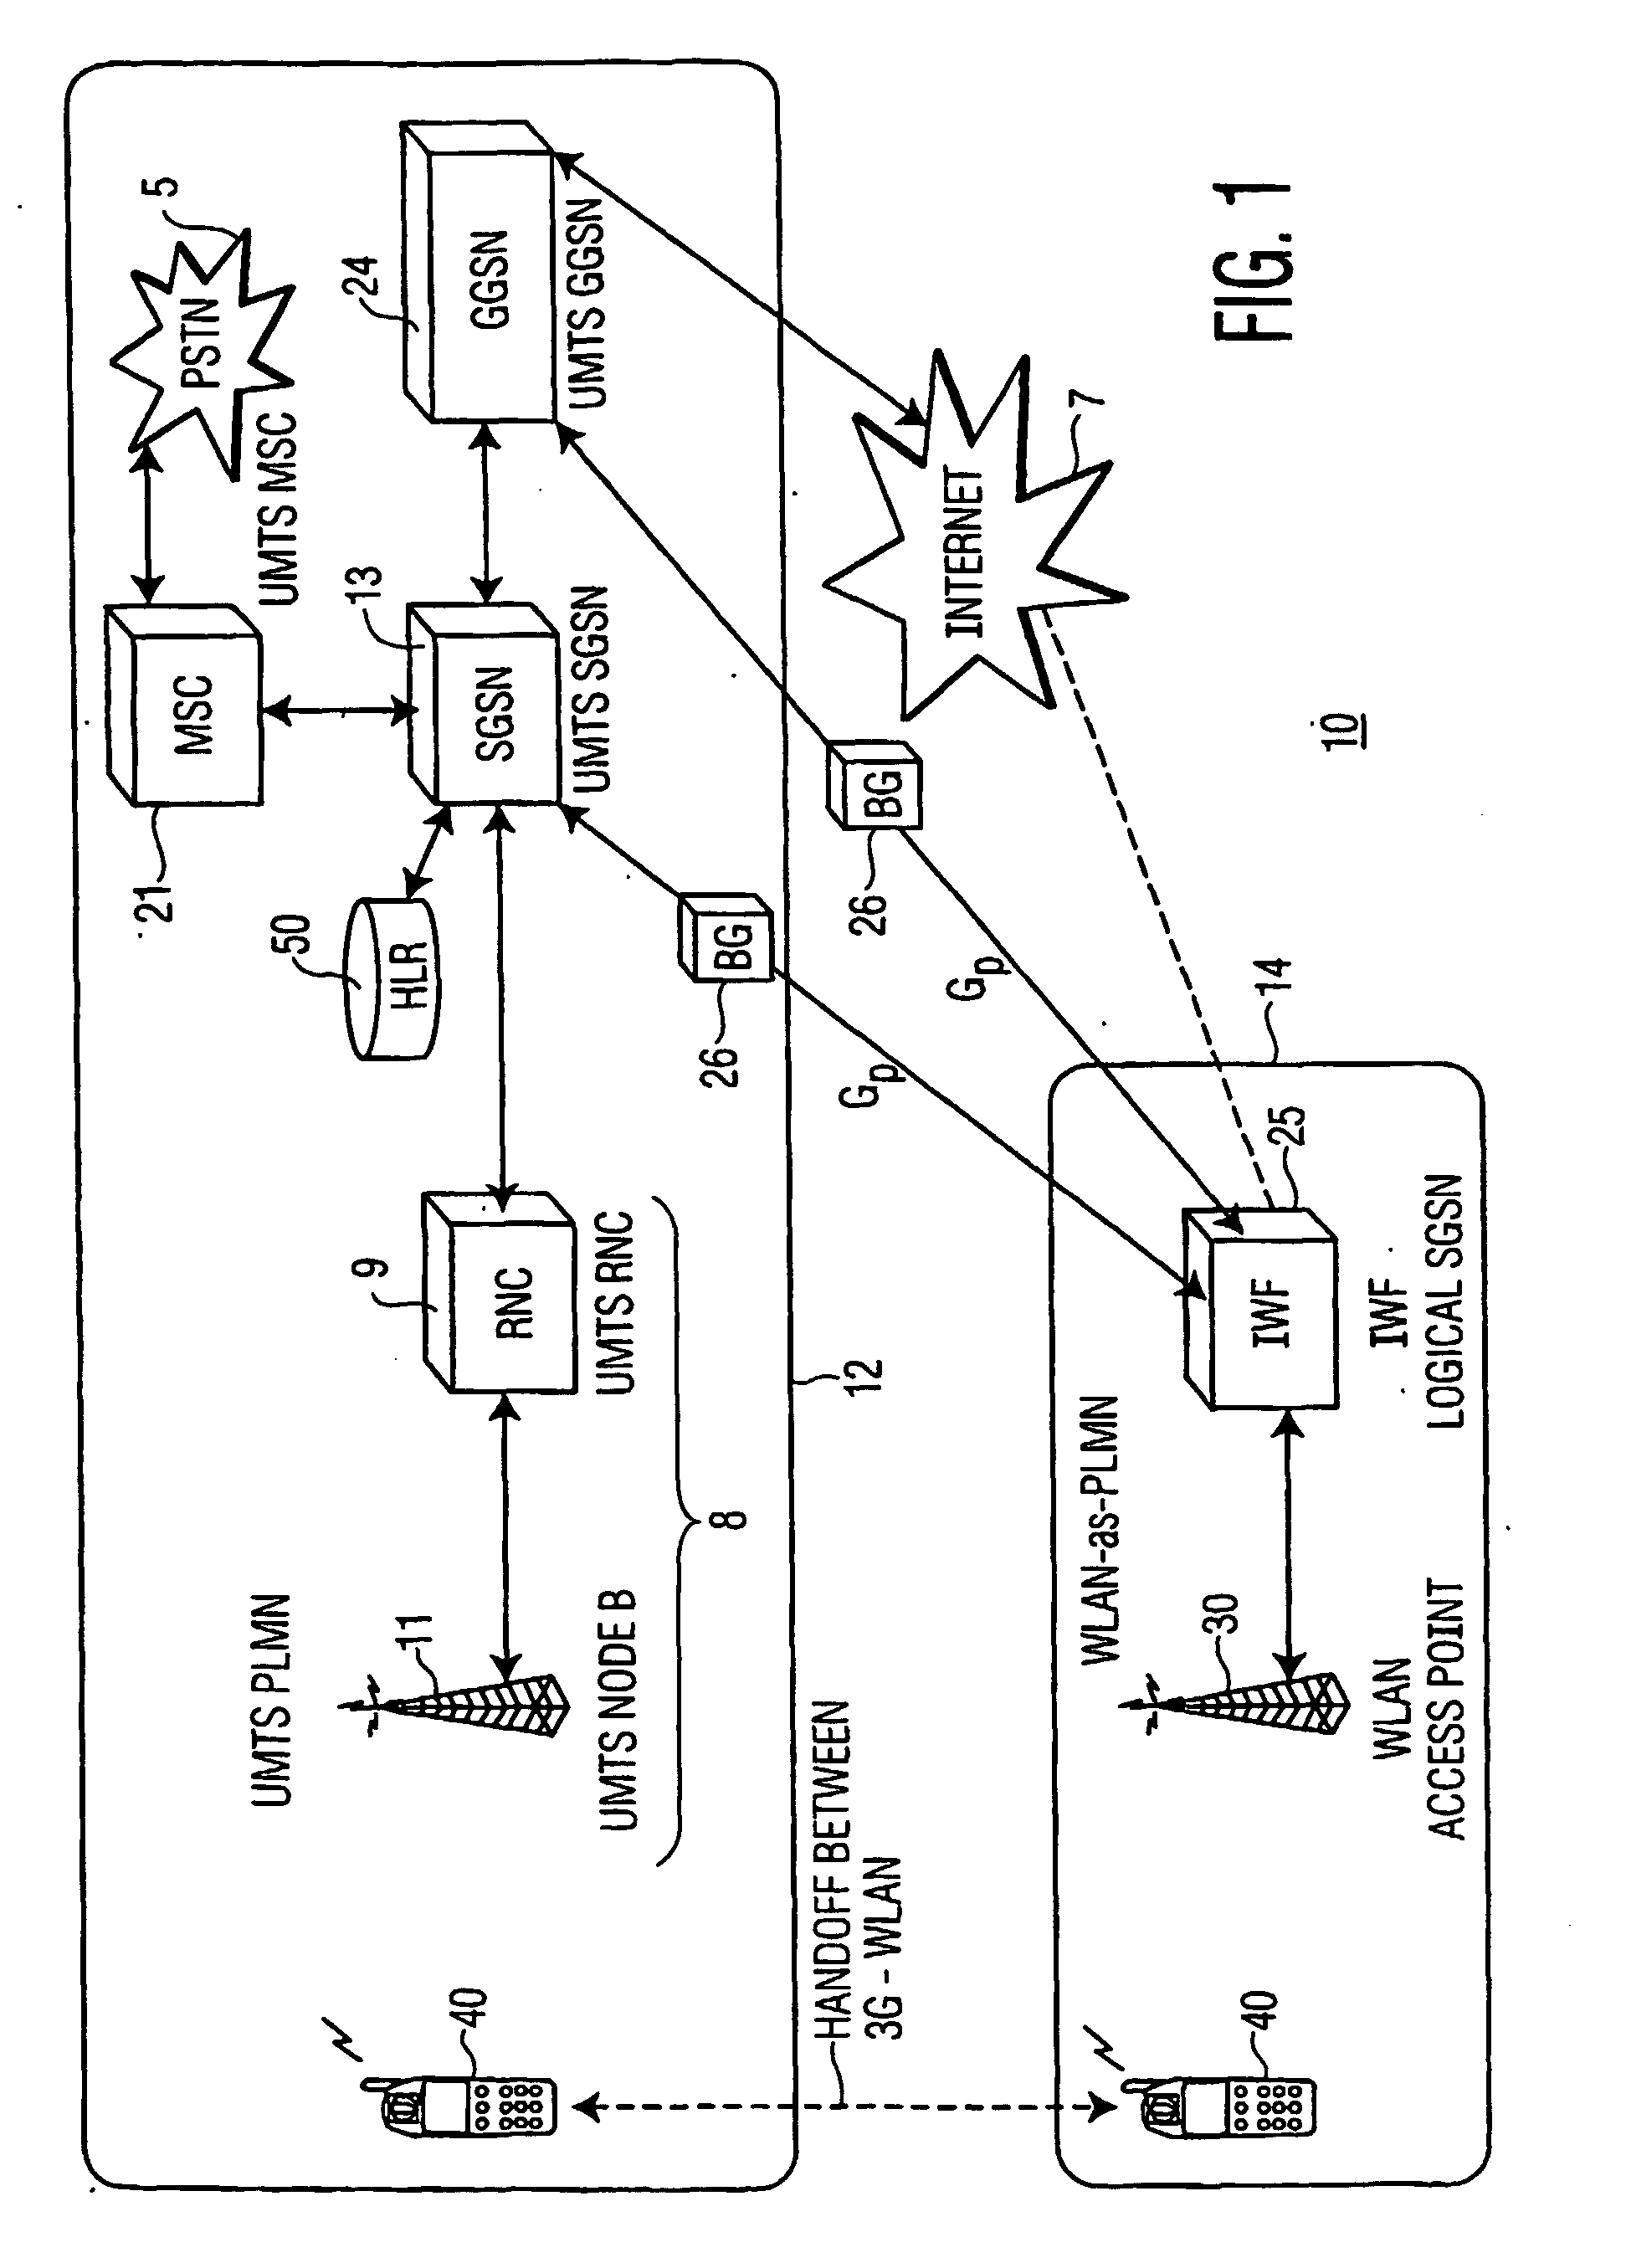 Wireless local area network (wlan) as a public land mobile network for wlan/telecommunications system interworking